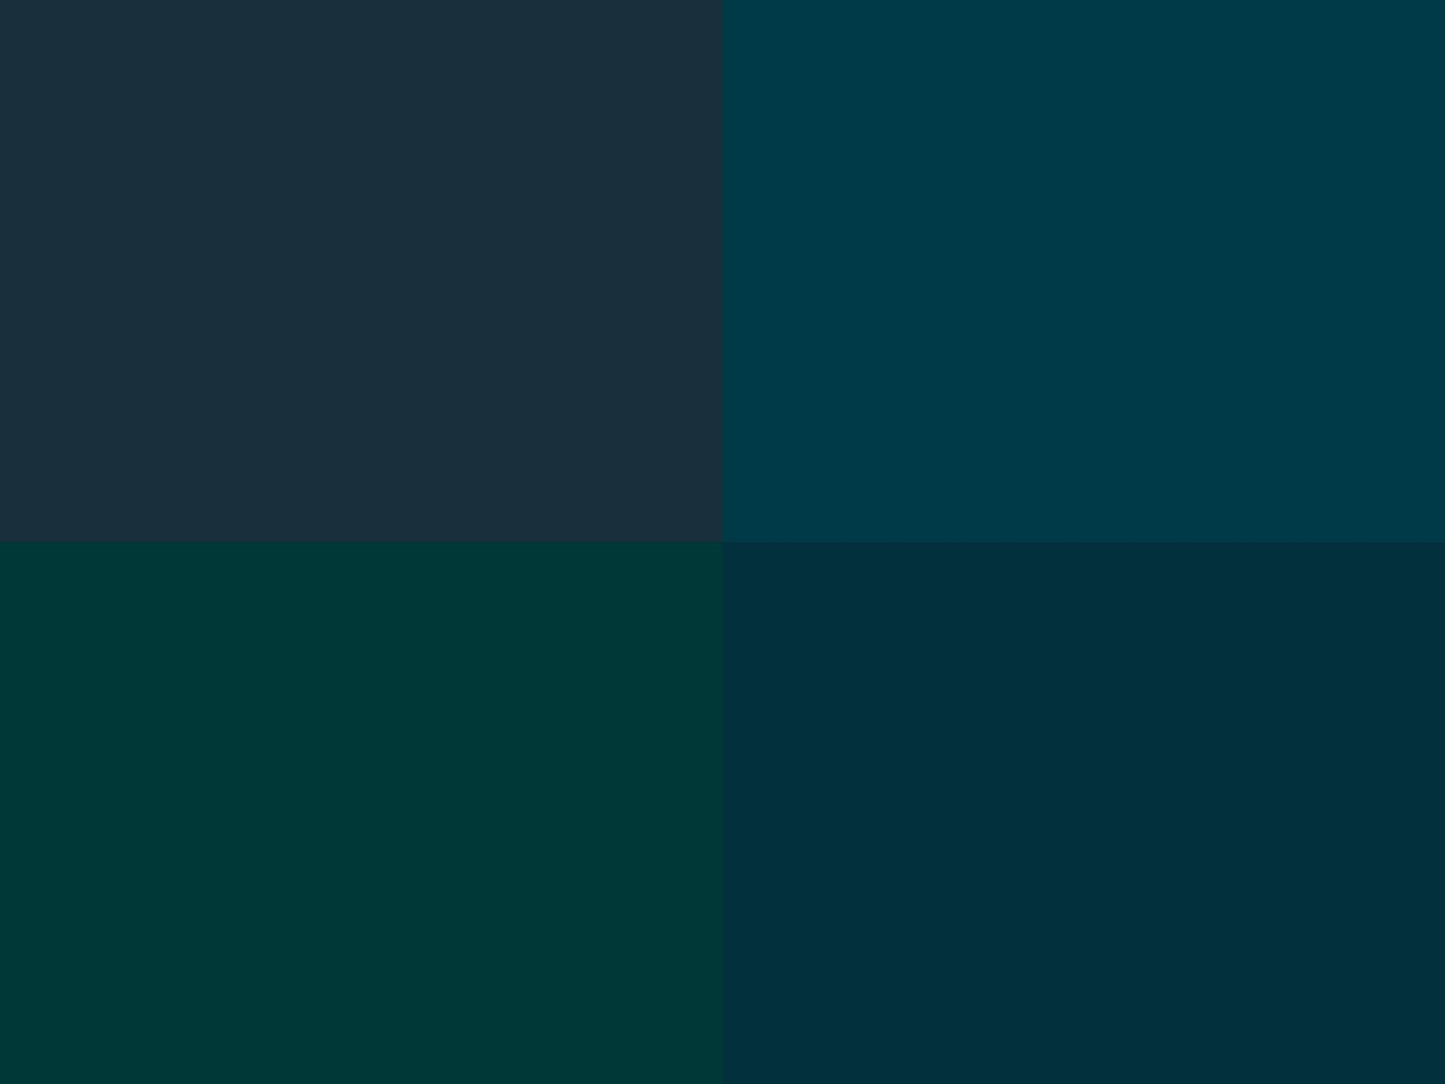 Hoooked Zpagetti Dark Teal Green Cotton T-Shirt Yarn - 120M 700g (Pack of 3)